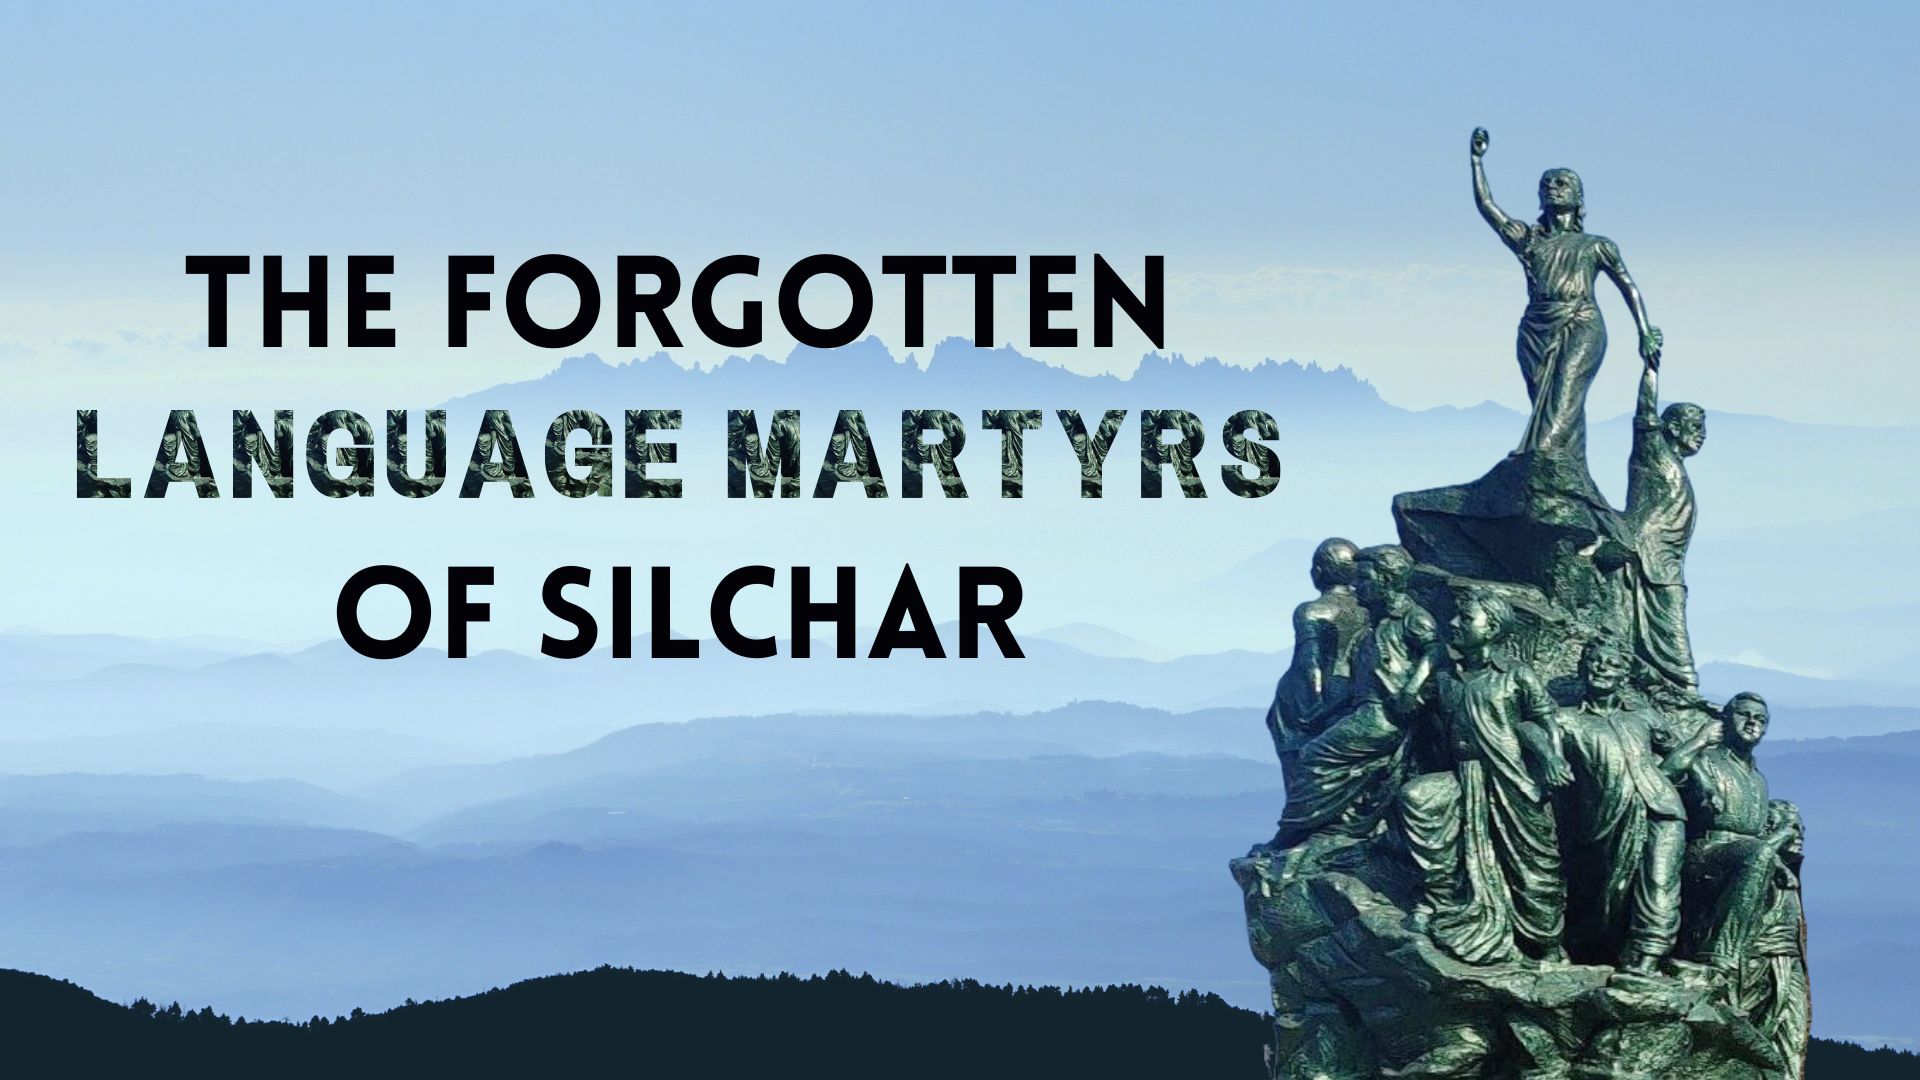 The Forgotten Language Martyrs of Silchar